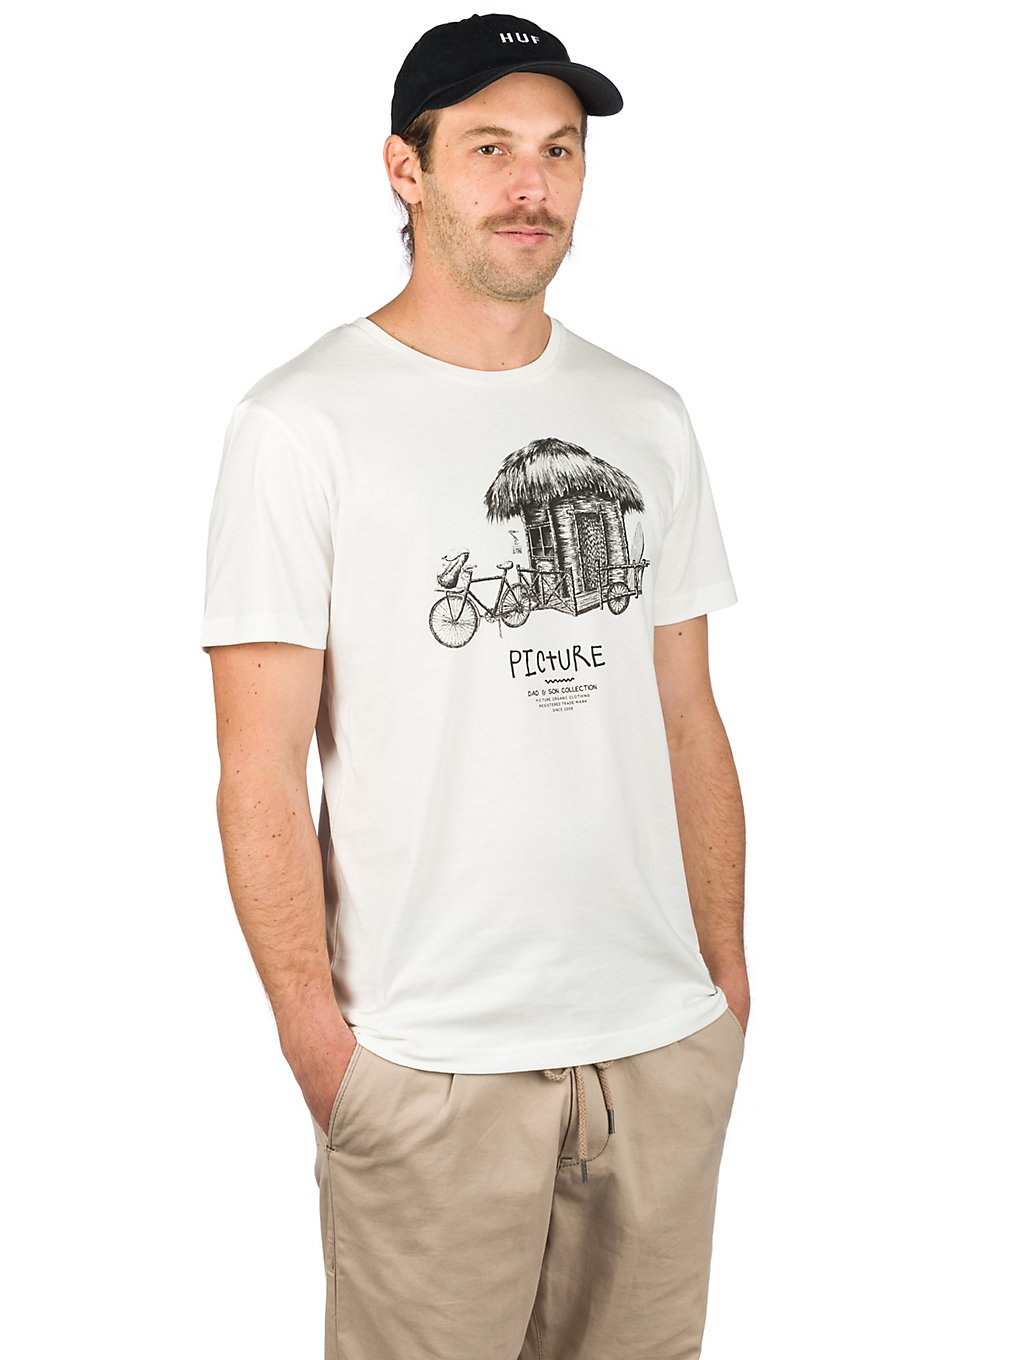 Picture Dad & Son Bike T-Shirt weiss